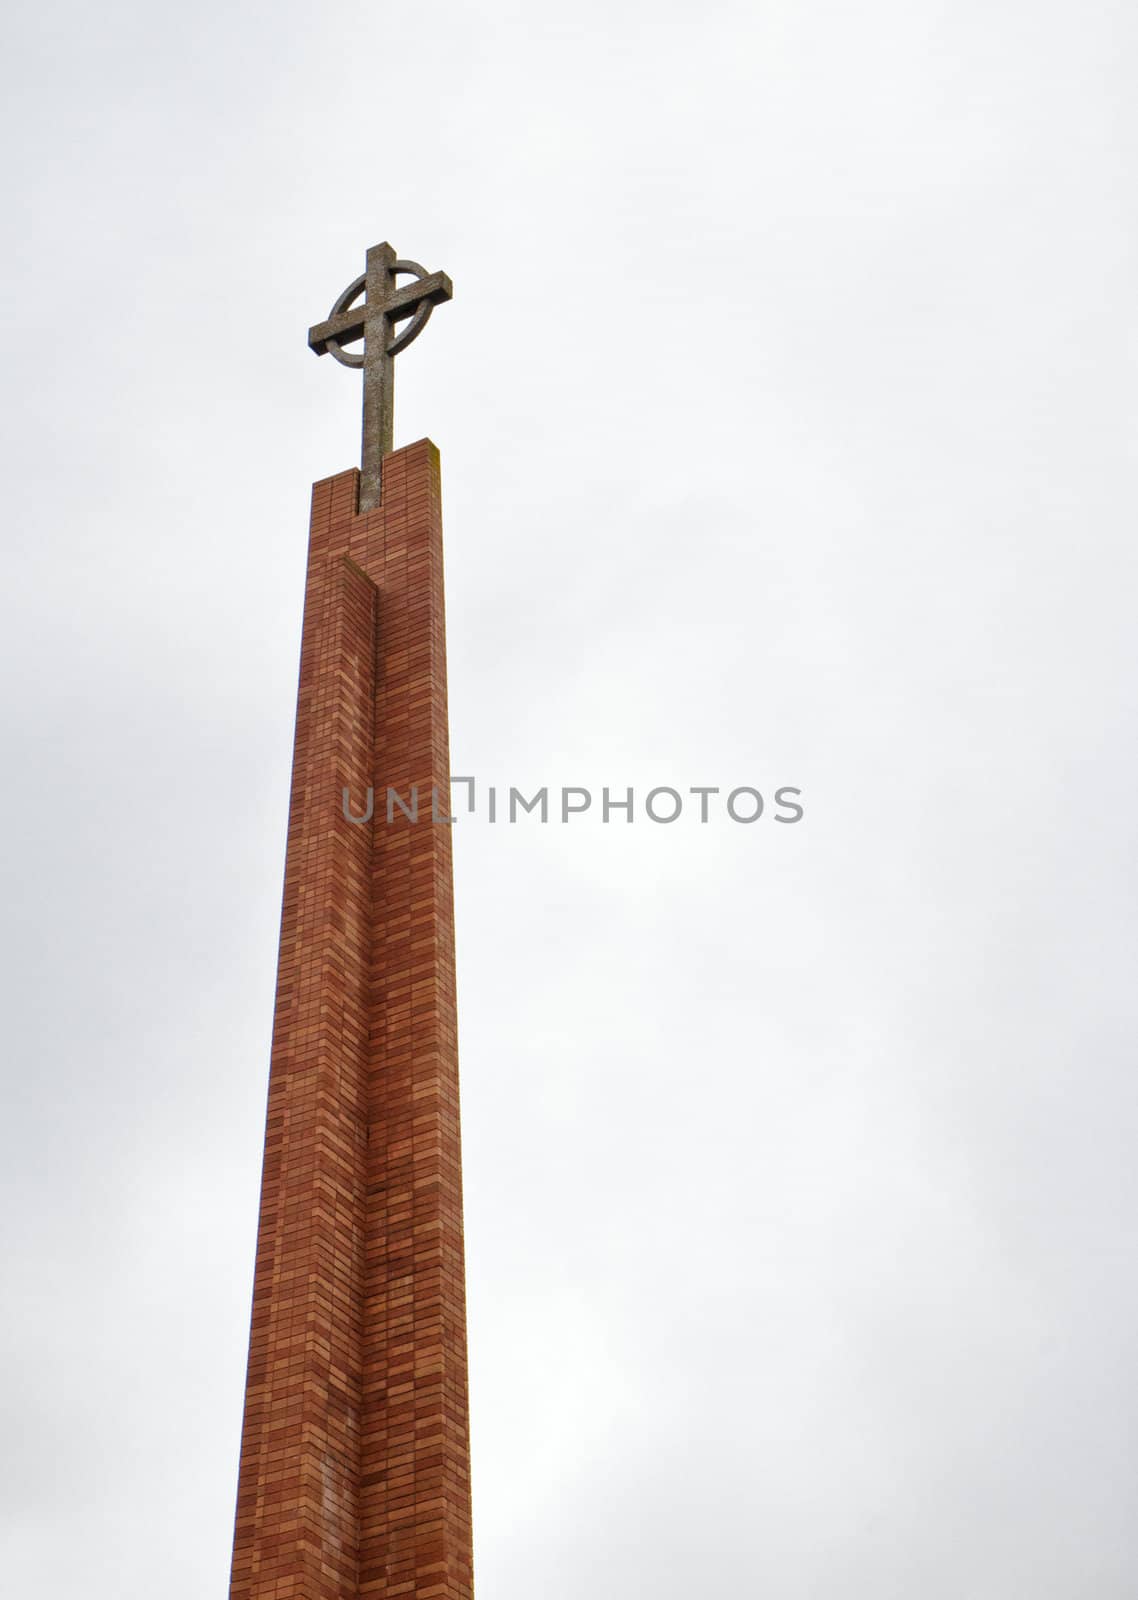 Church cross on top of a red brick tower against a cloudy sky